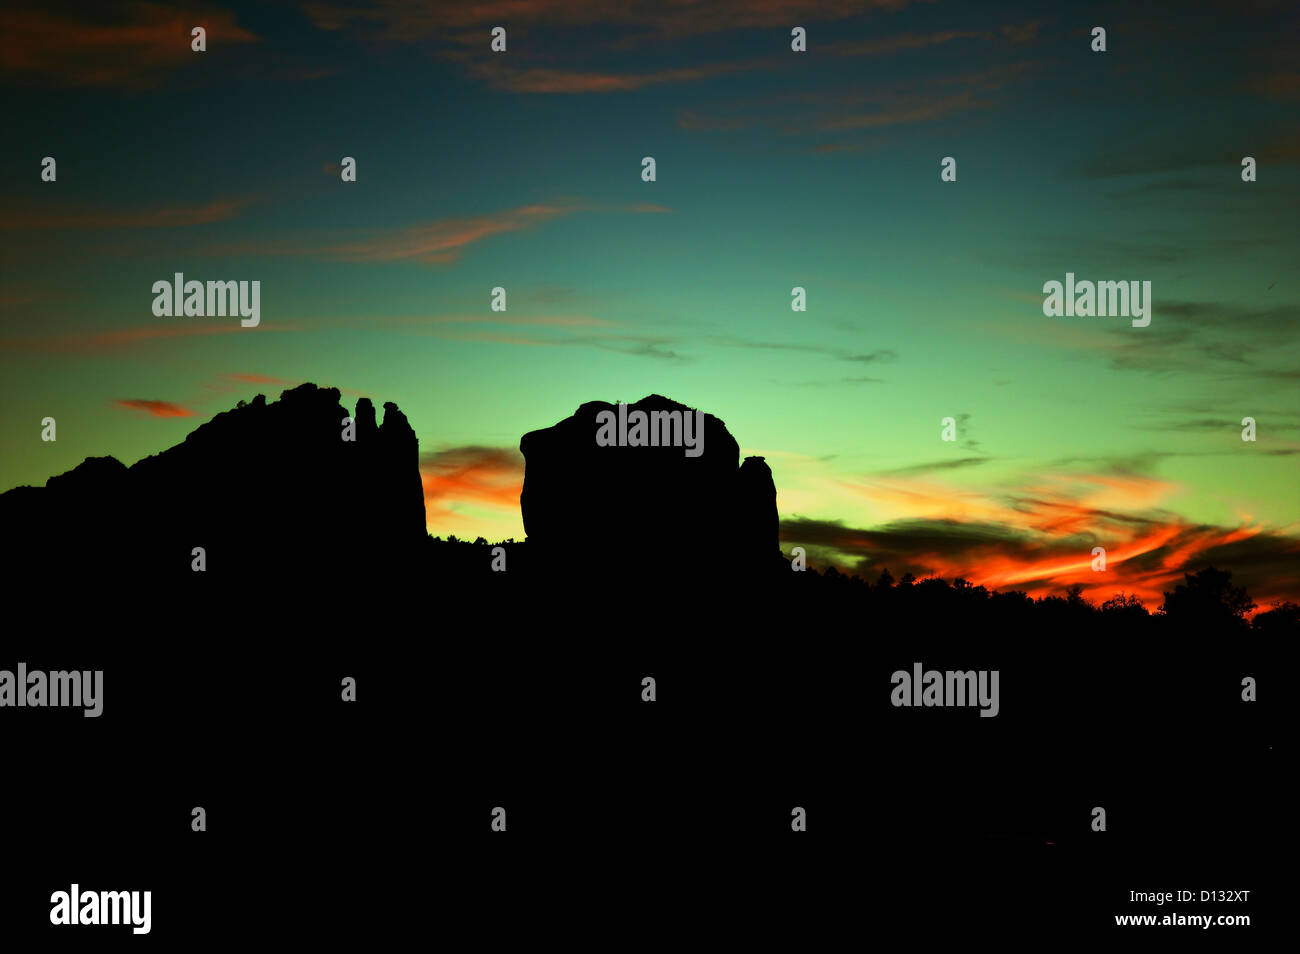 Silhouette of rocks with sunset in the distance Stock Photo